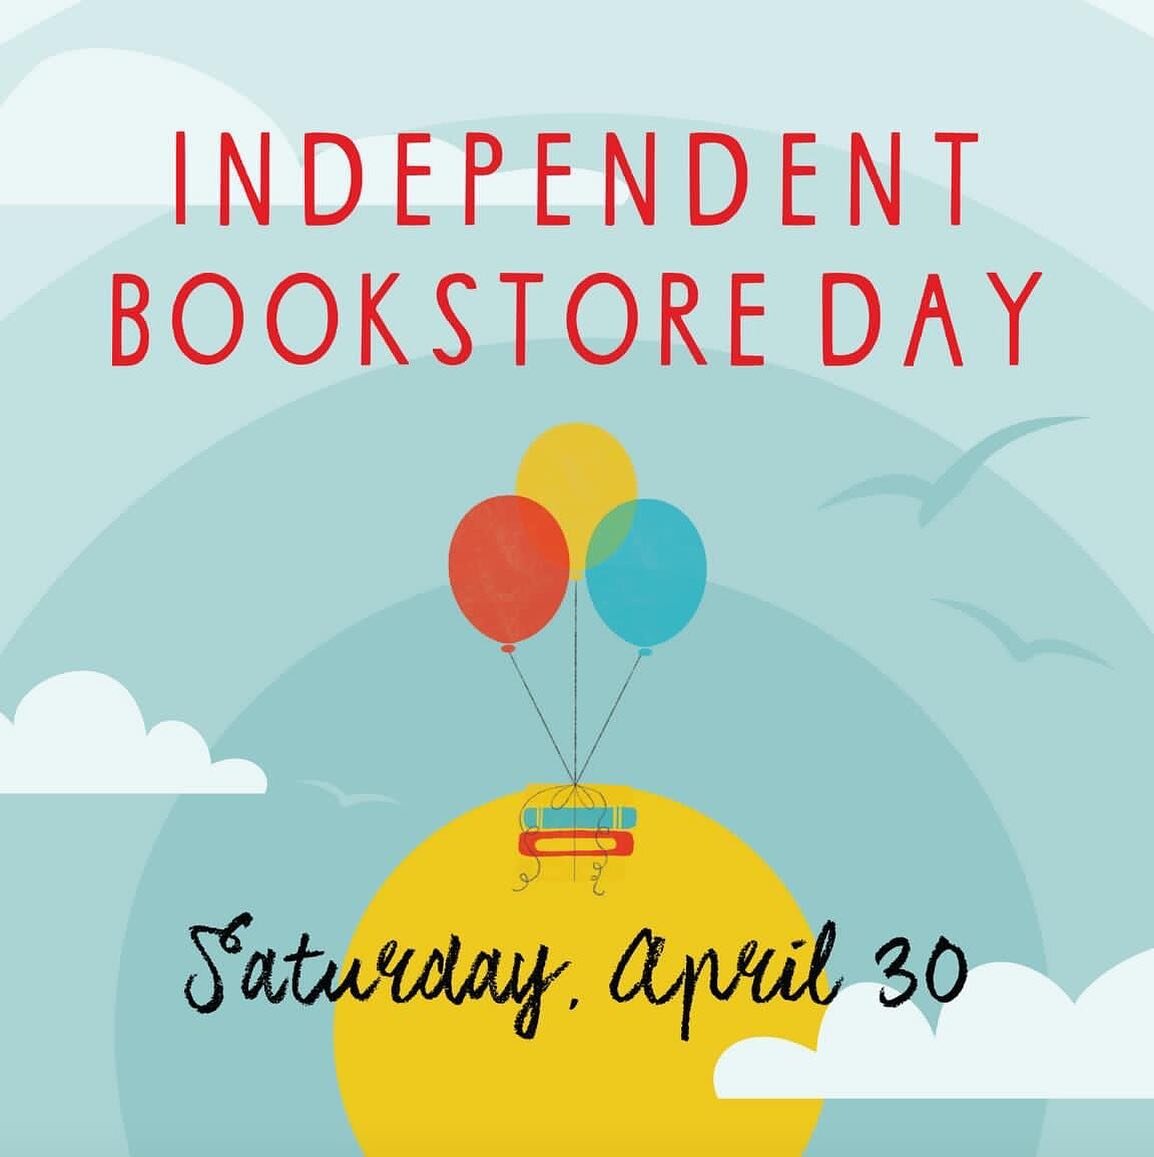 Did you know this Saturday is Independent Bookstore Day? Comment with phones of your favorite independent bookstore and tag them to support!